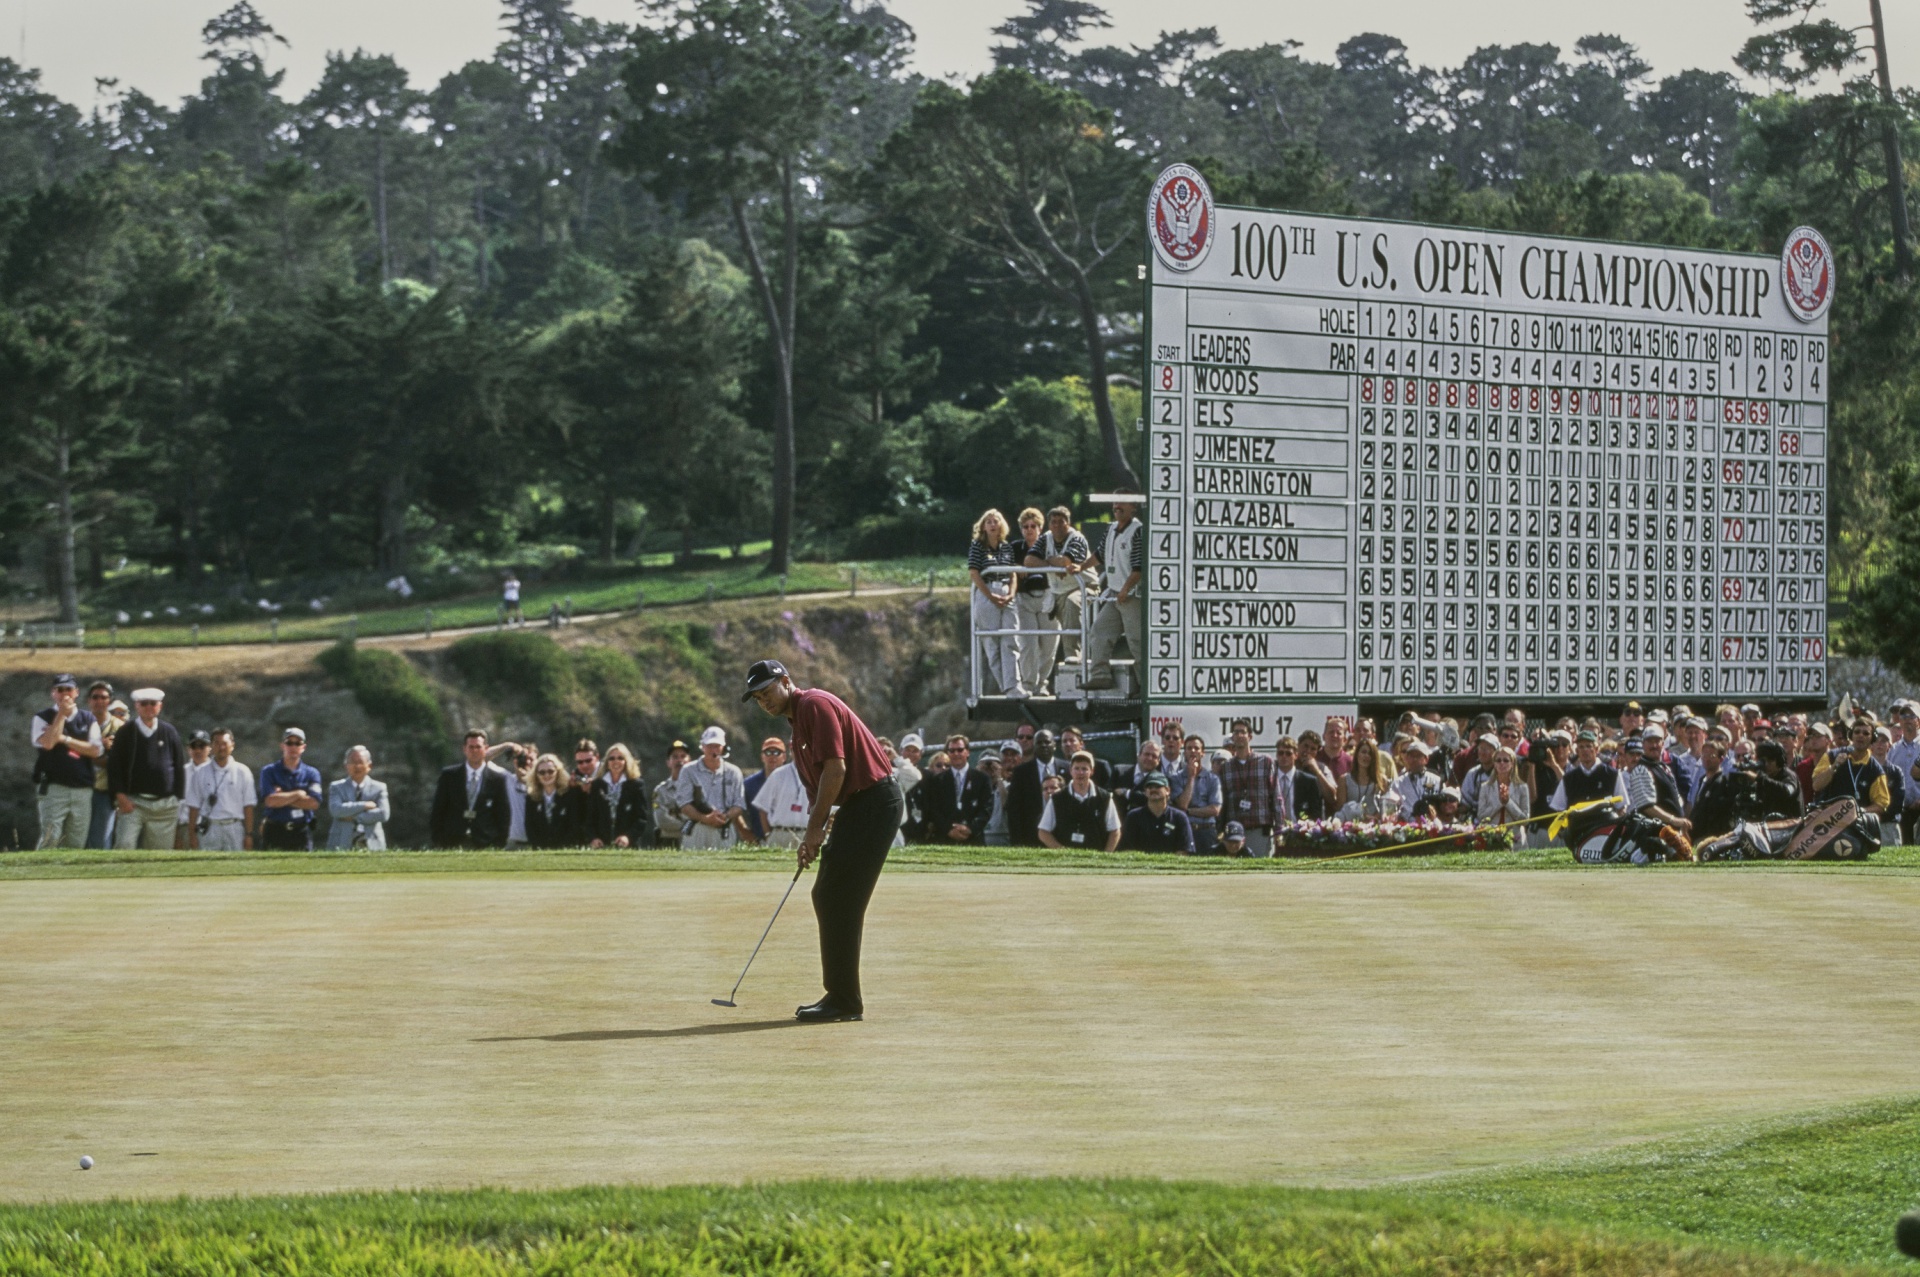 ©Getty_Images_David_Cannon_ROLEX_TESTIMONEE_TIGER_WOODS_HITS_THE_WINNING_PUTT_AT_THE_2000_U.S._OPEN_AT_PEBBLE_BEACH.jpg (829 KB)